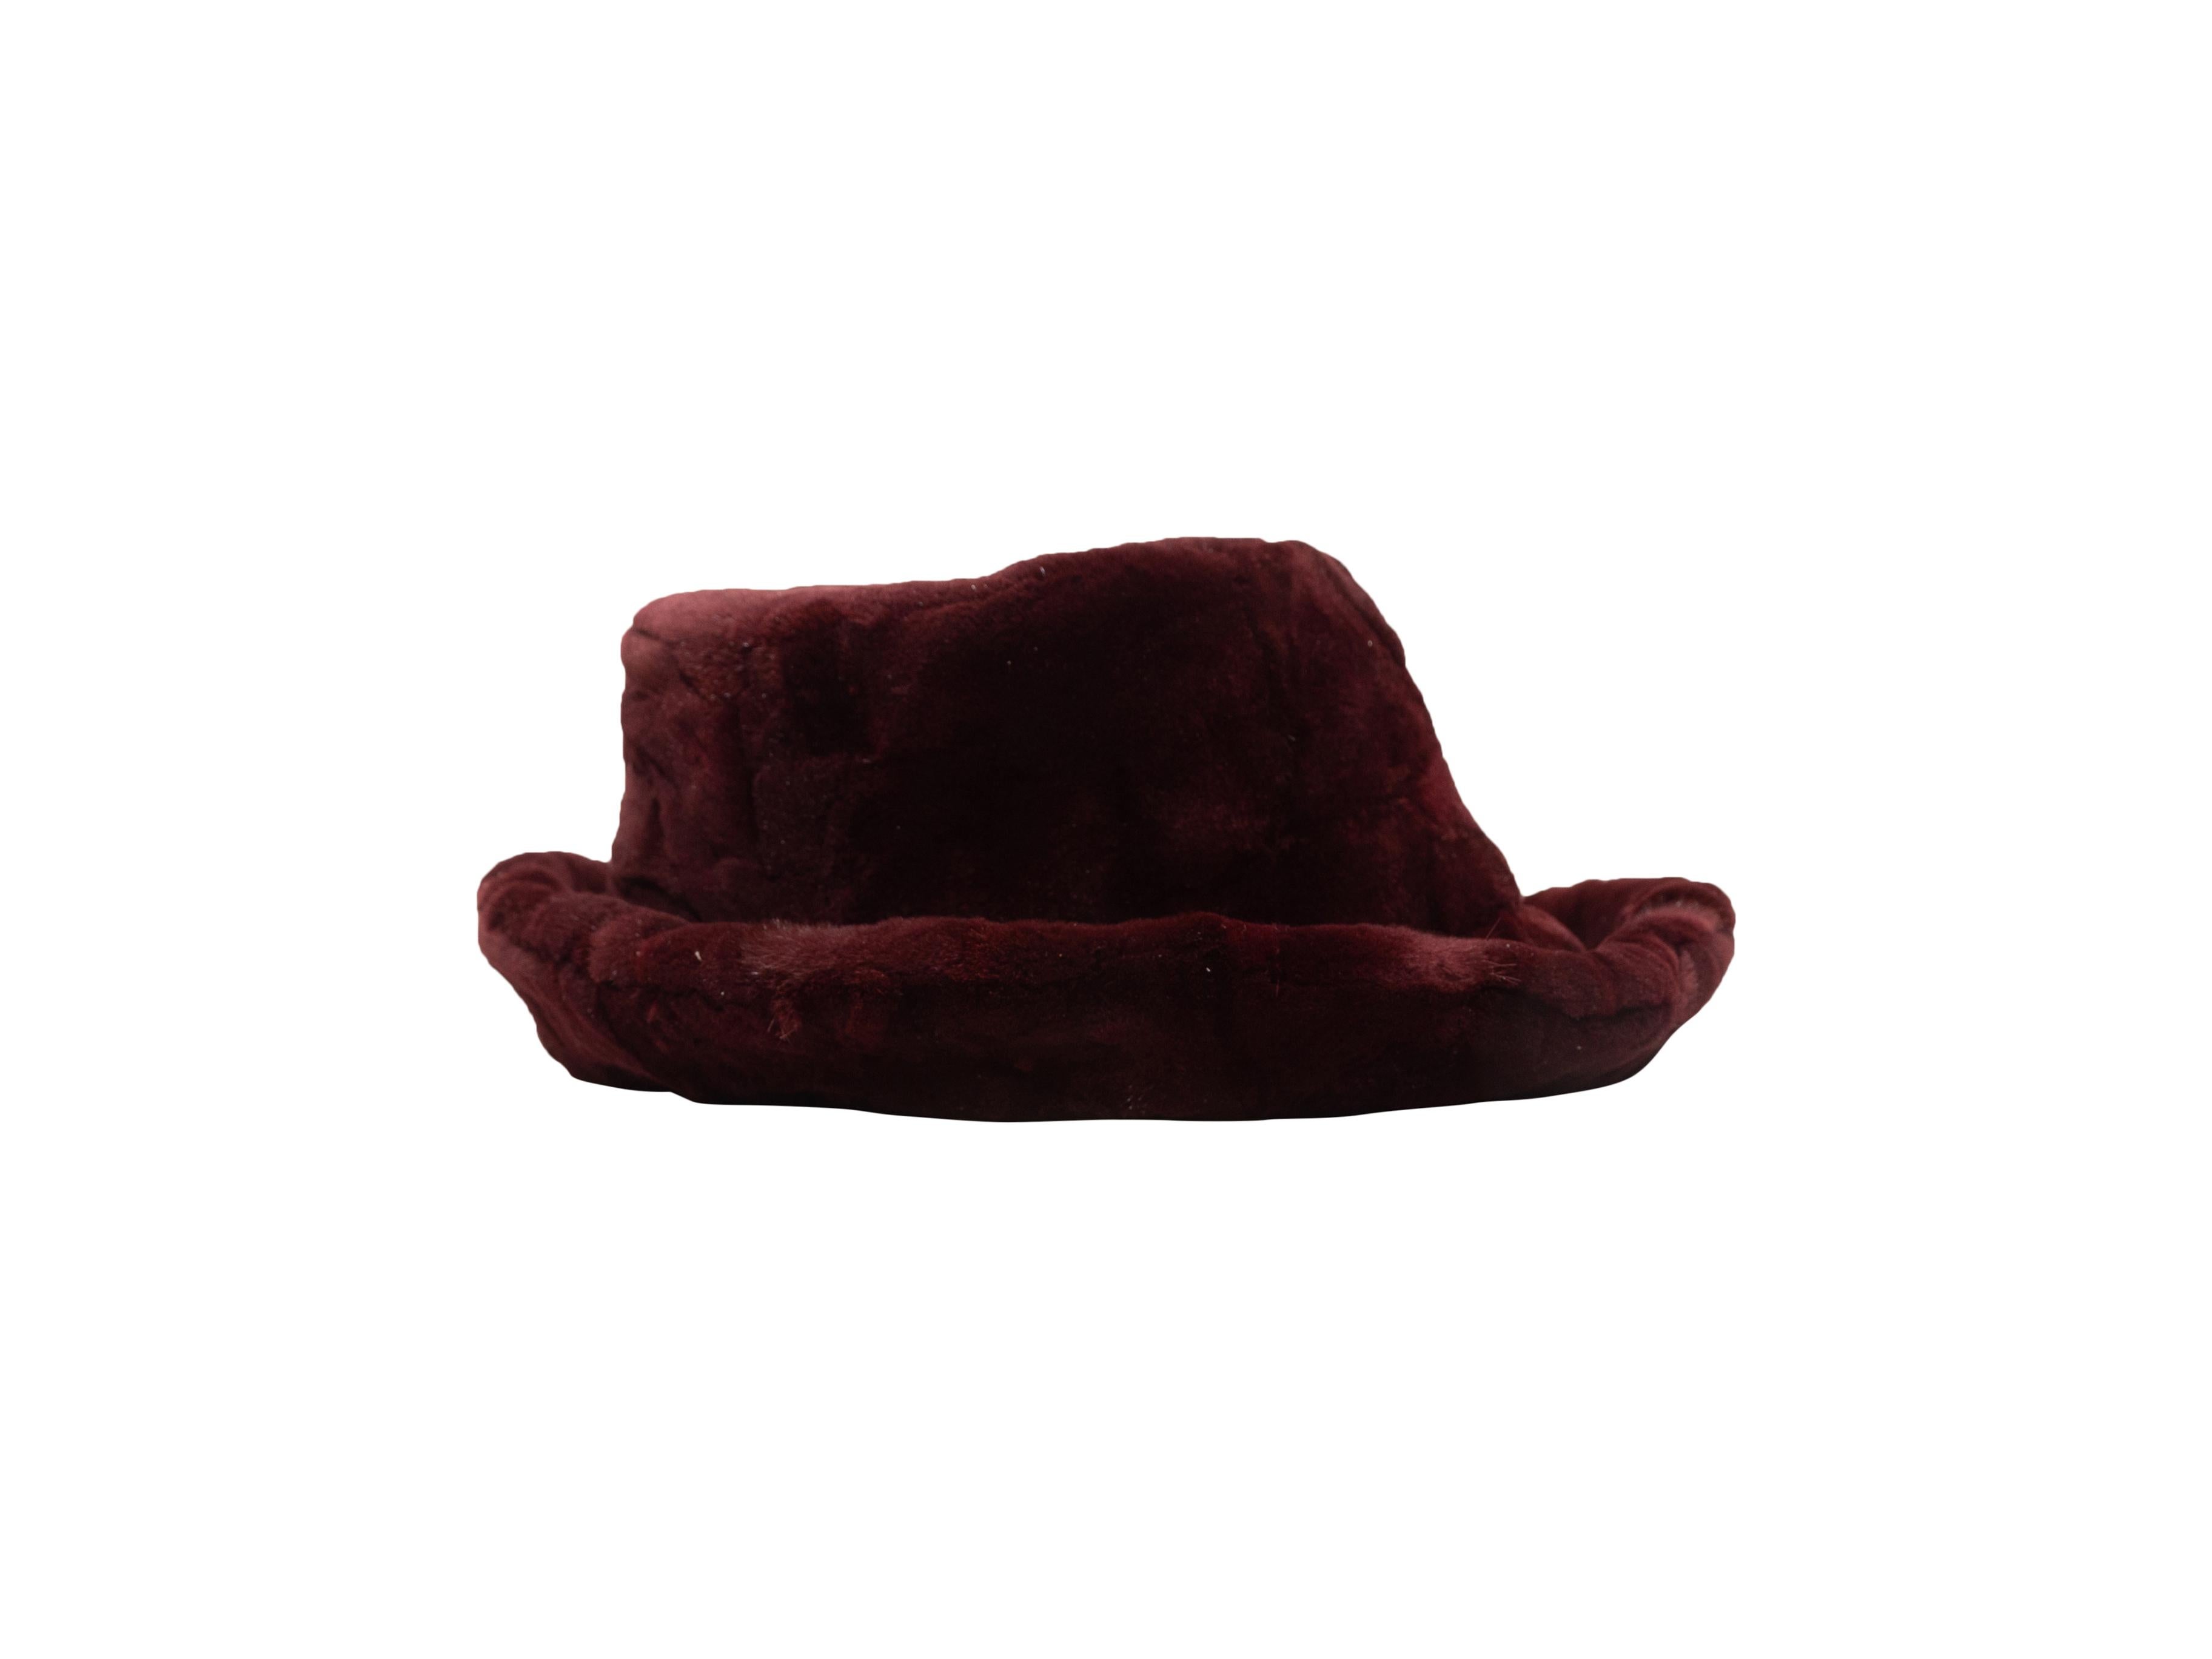 Product Details: Burgundy fur hat by Patricia Underwood. 4